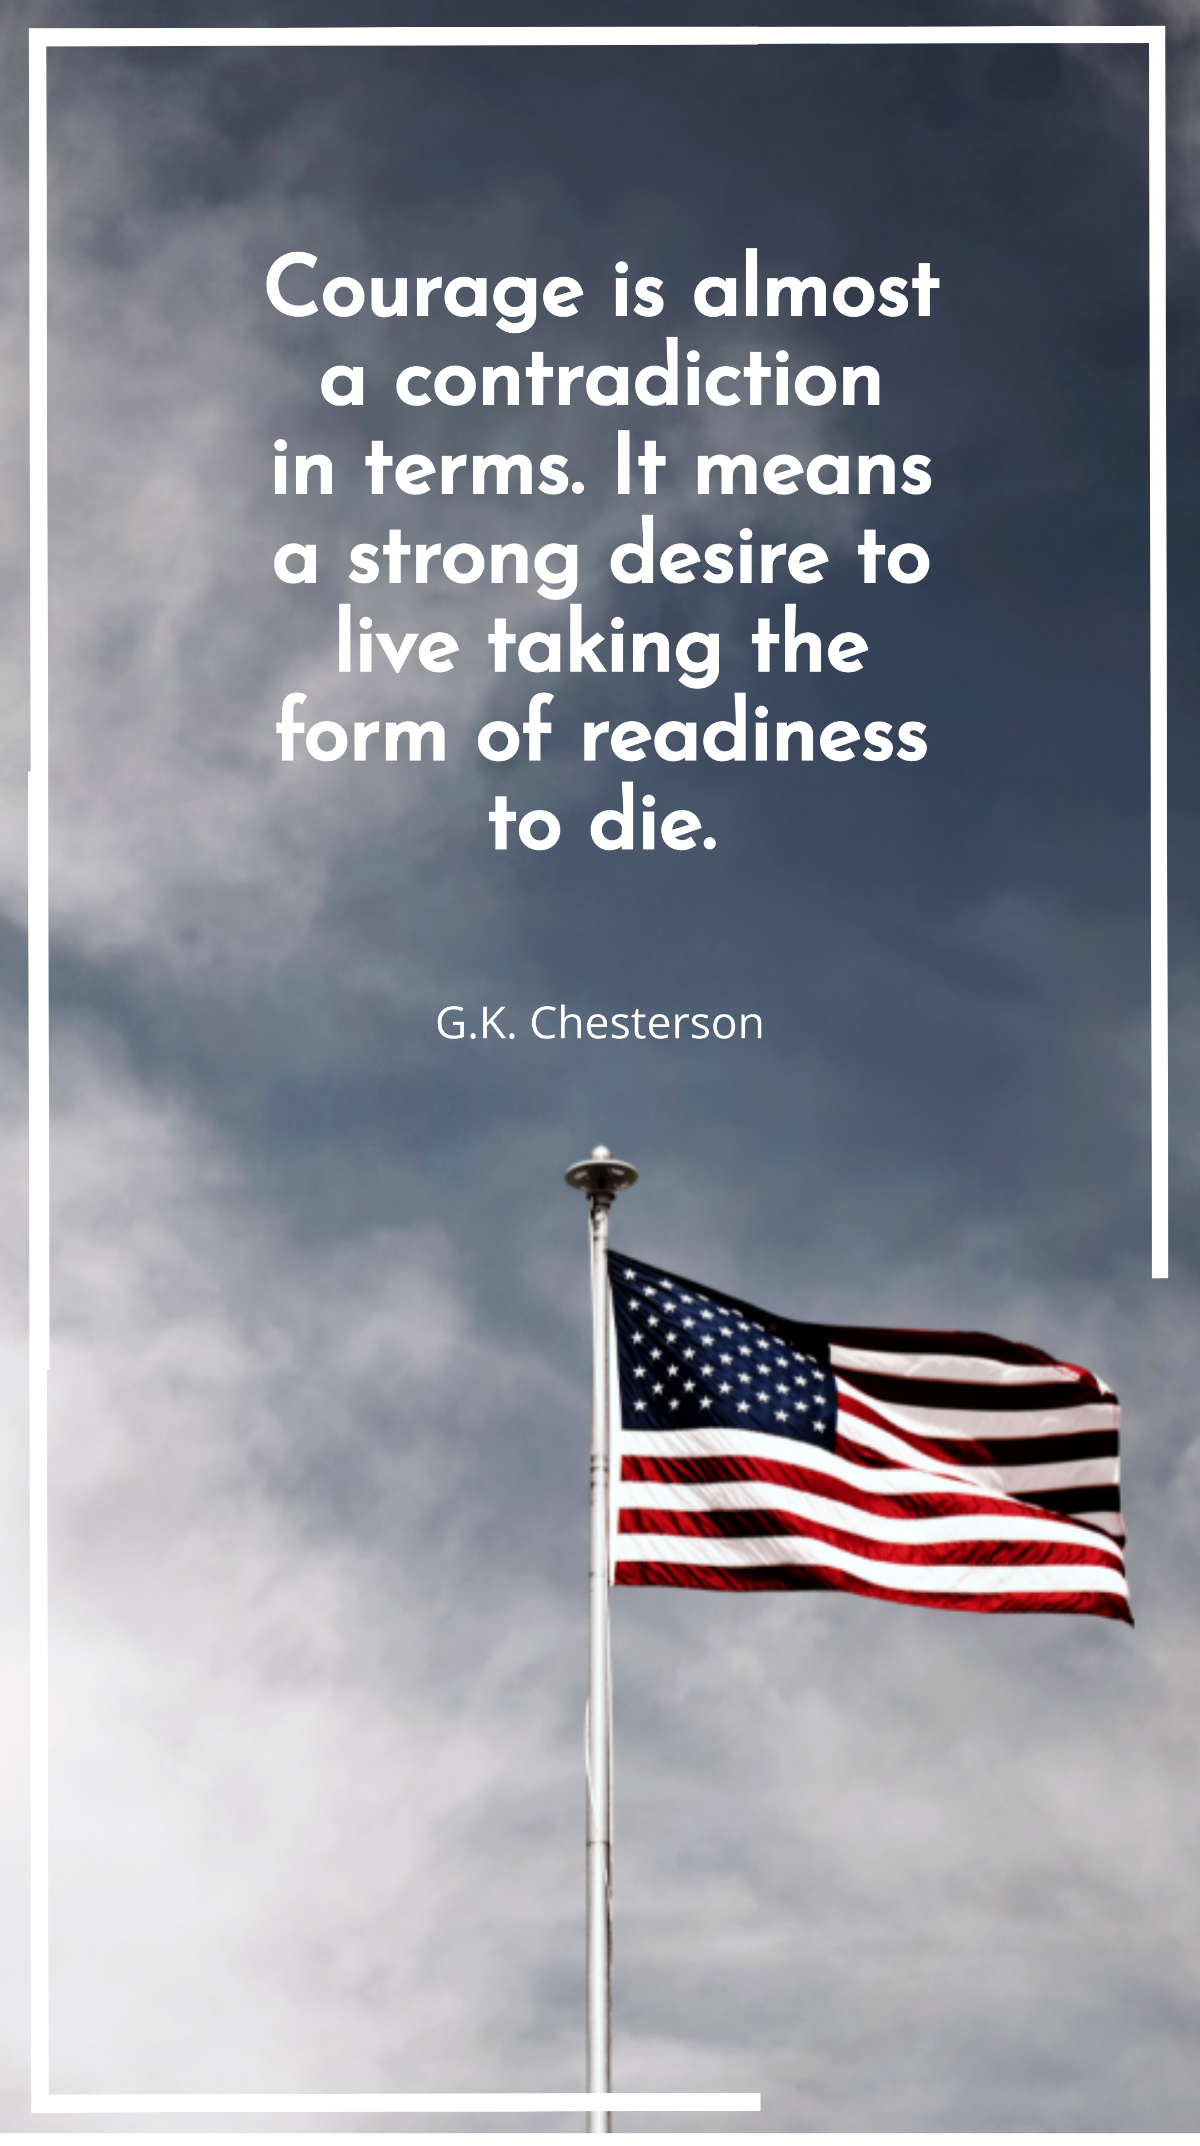 G.K. Chesterson - "Courage is almost a contradiction in terms. It means a strong desire to live taking the form of readiness to die.”